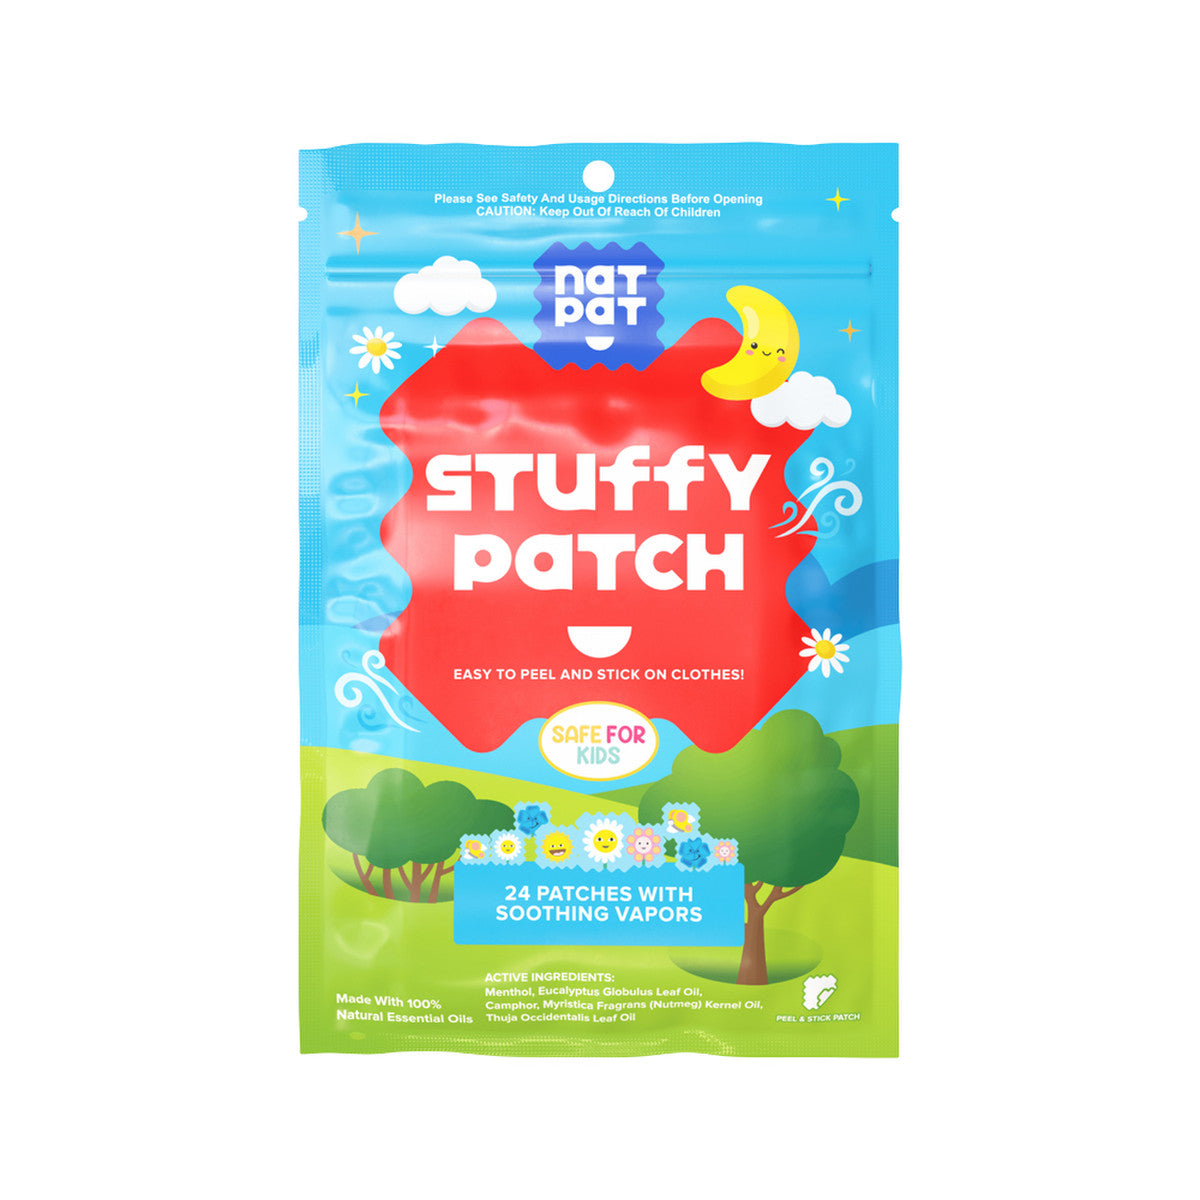 NATPAT (The Natural Patch Co.) - StuffyPatch Organic Stickers